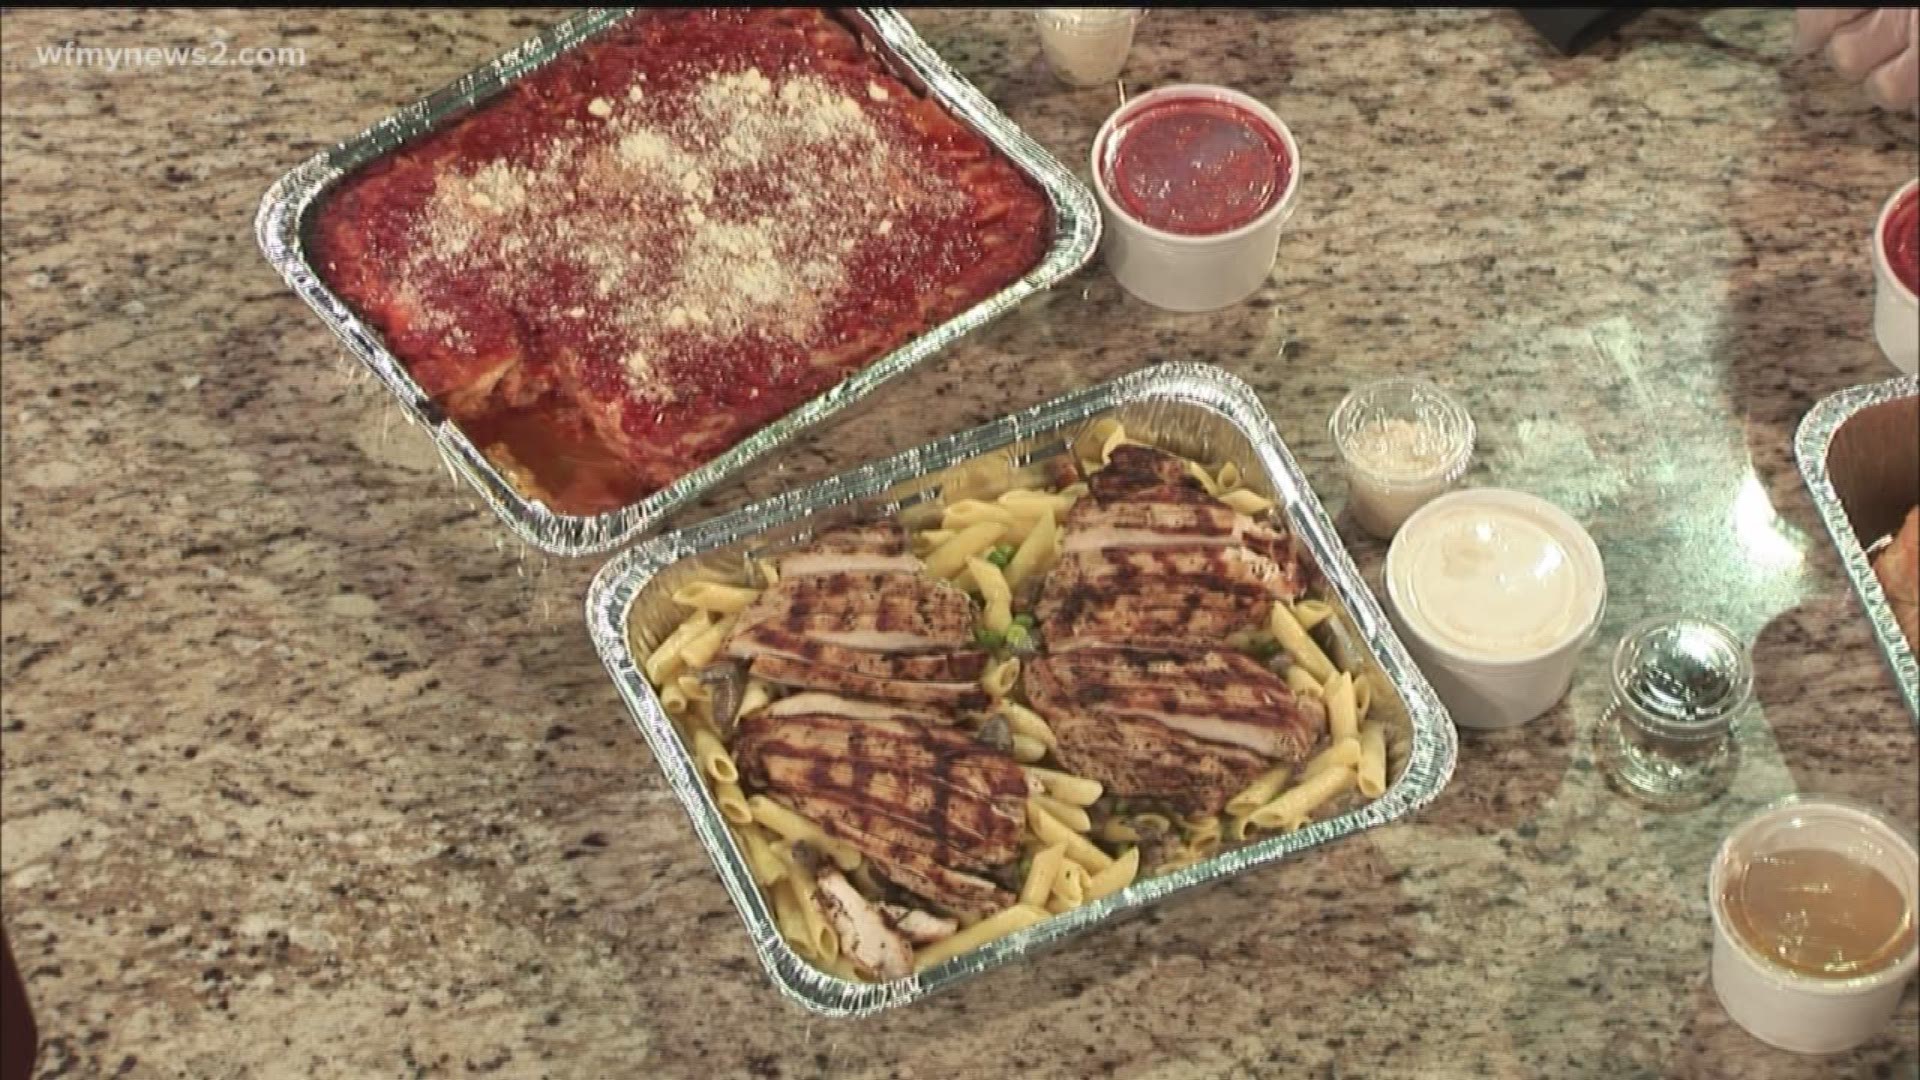 Carrabba’s is back with an Italian take on Thanksgiving.